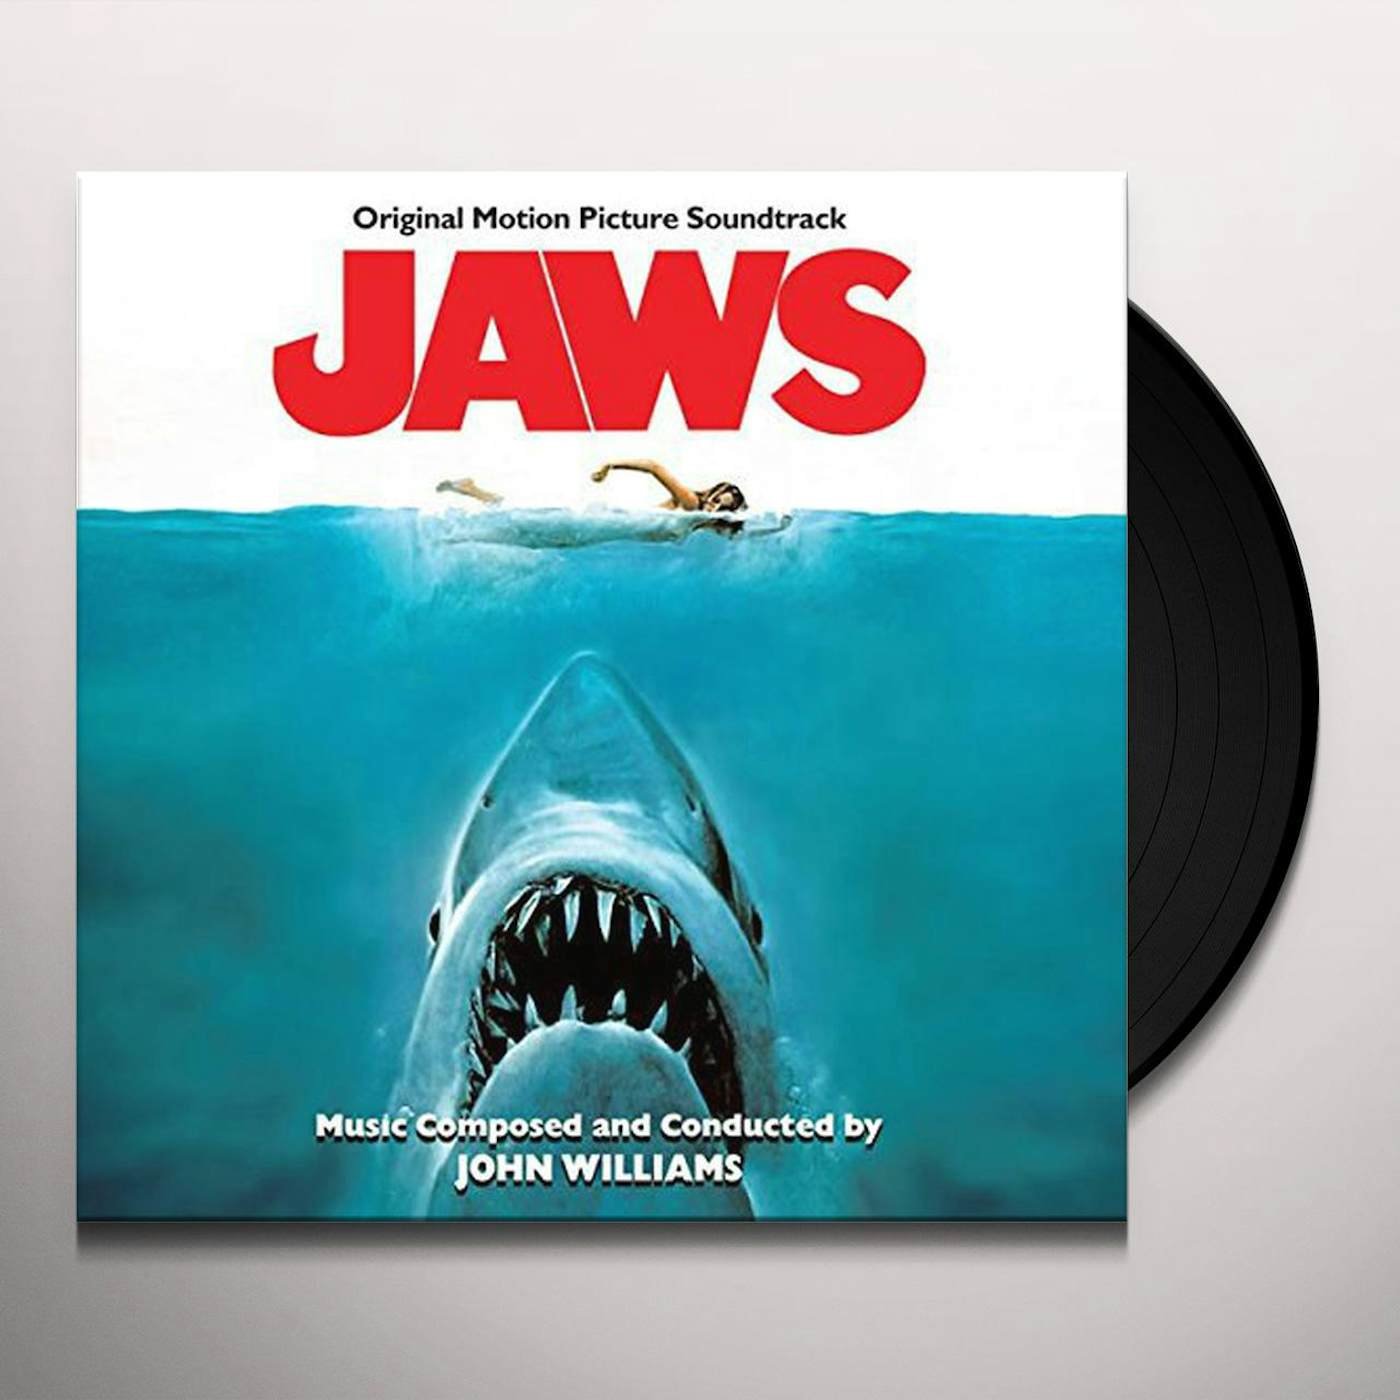 Original Sound Version YOUR CD PLAYER IS NO LONGER SAFE - Complete JAWS  Soundtrack Now Available